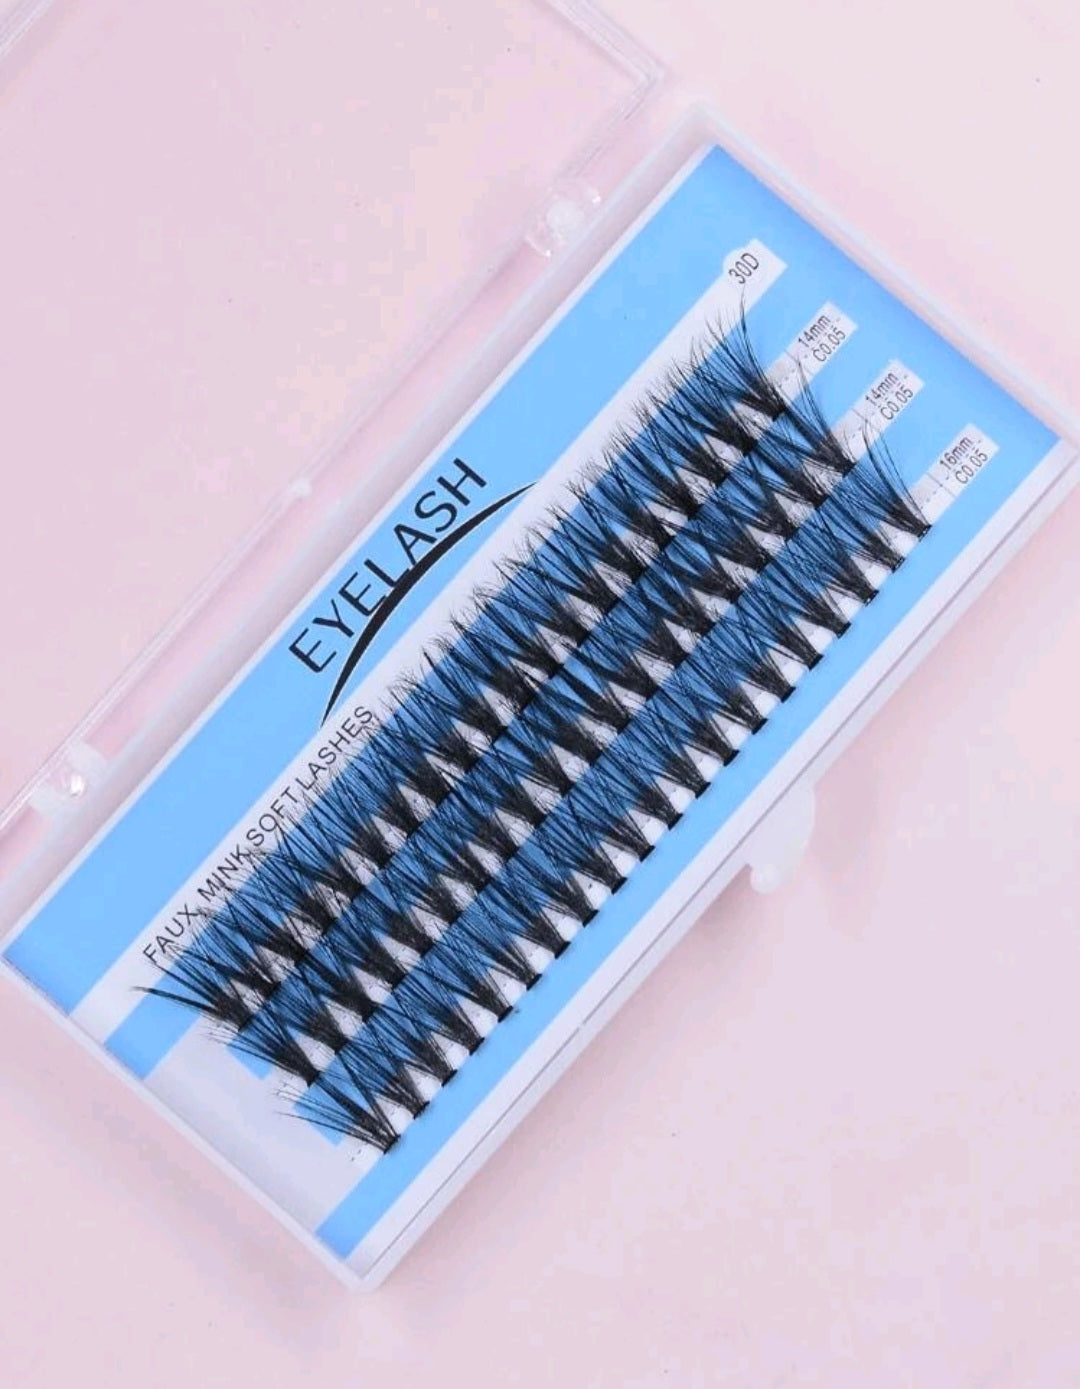 Faux Mink Individual EyeLashes ~Ciglia finte individuali  9mm-13mm - SANDY'S MAKEUP AND ARTISTRY 